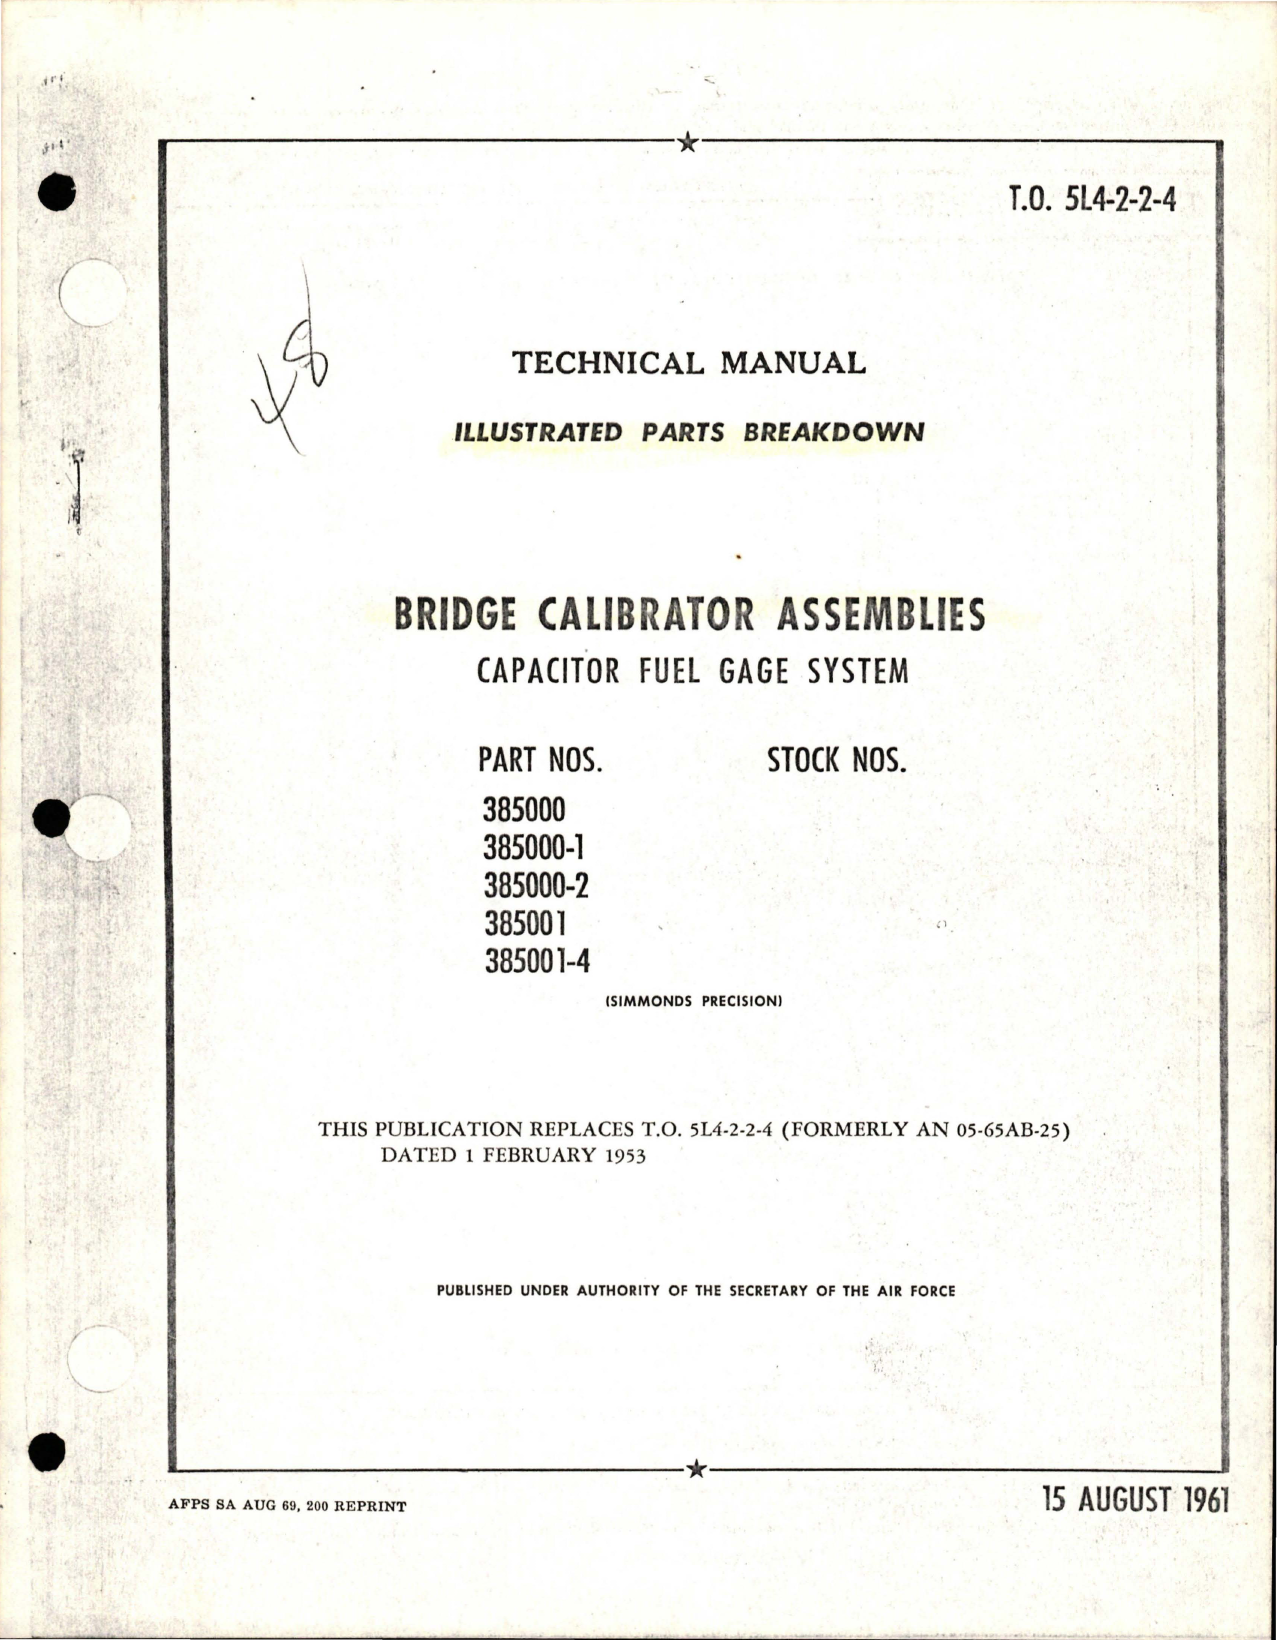 Sample page 1 from AirCorps Library document: Illustrated Parts Breakdown for Bridge Calibrator Assemblies - Capacitor Fuel Gage System